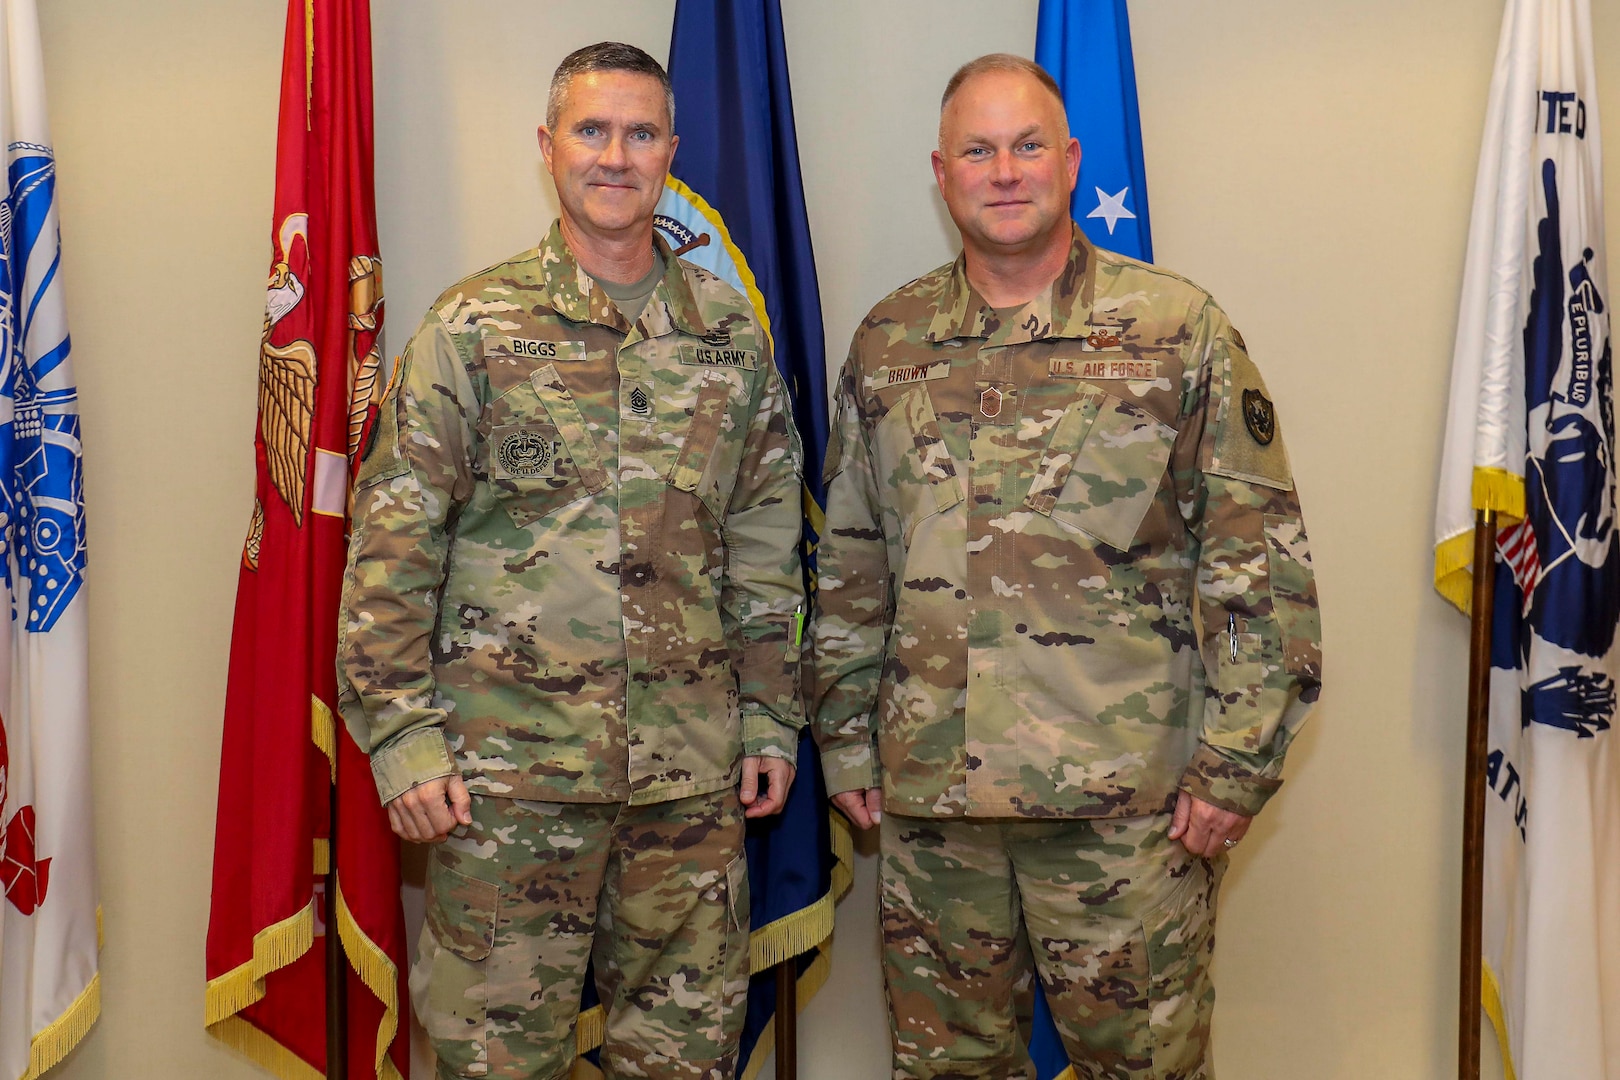 Senior enlisted leaders from Army Futures Command and JTFCS talk the